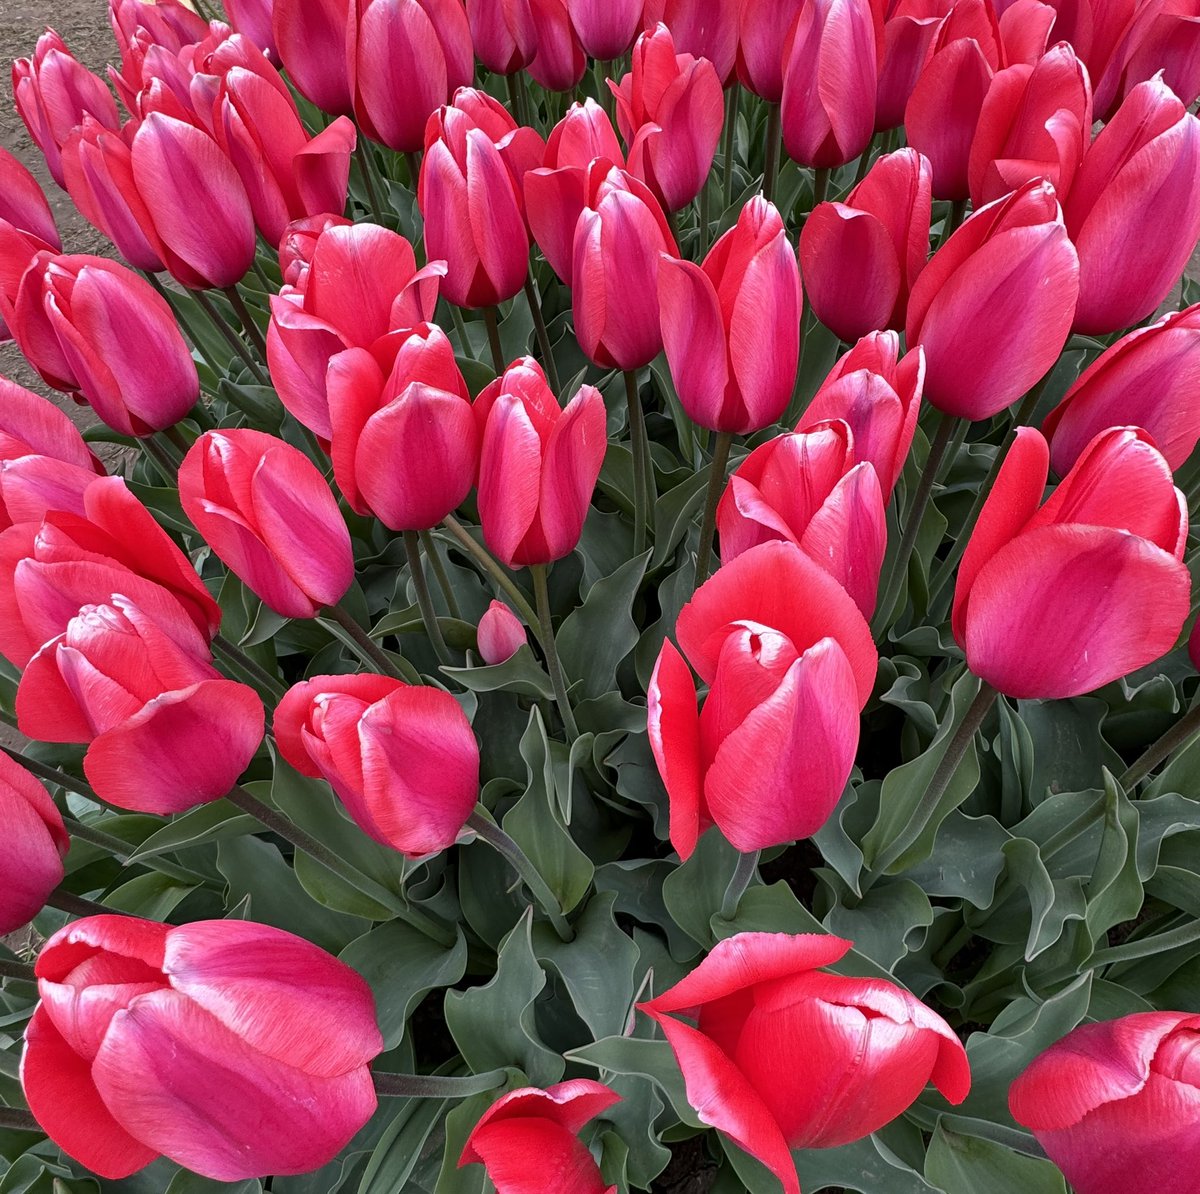 I am so excited that they now have a Wicked Tulips location near my daughter! Guess where I was today #Hearties! Just thought I’d beautify your newsfeed…🌷💐😁